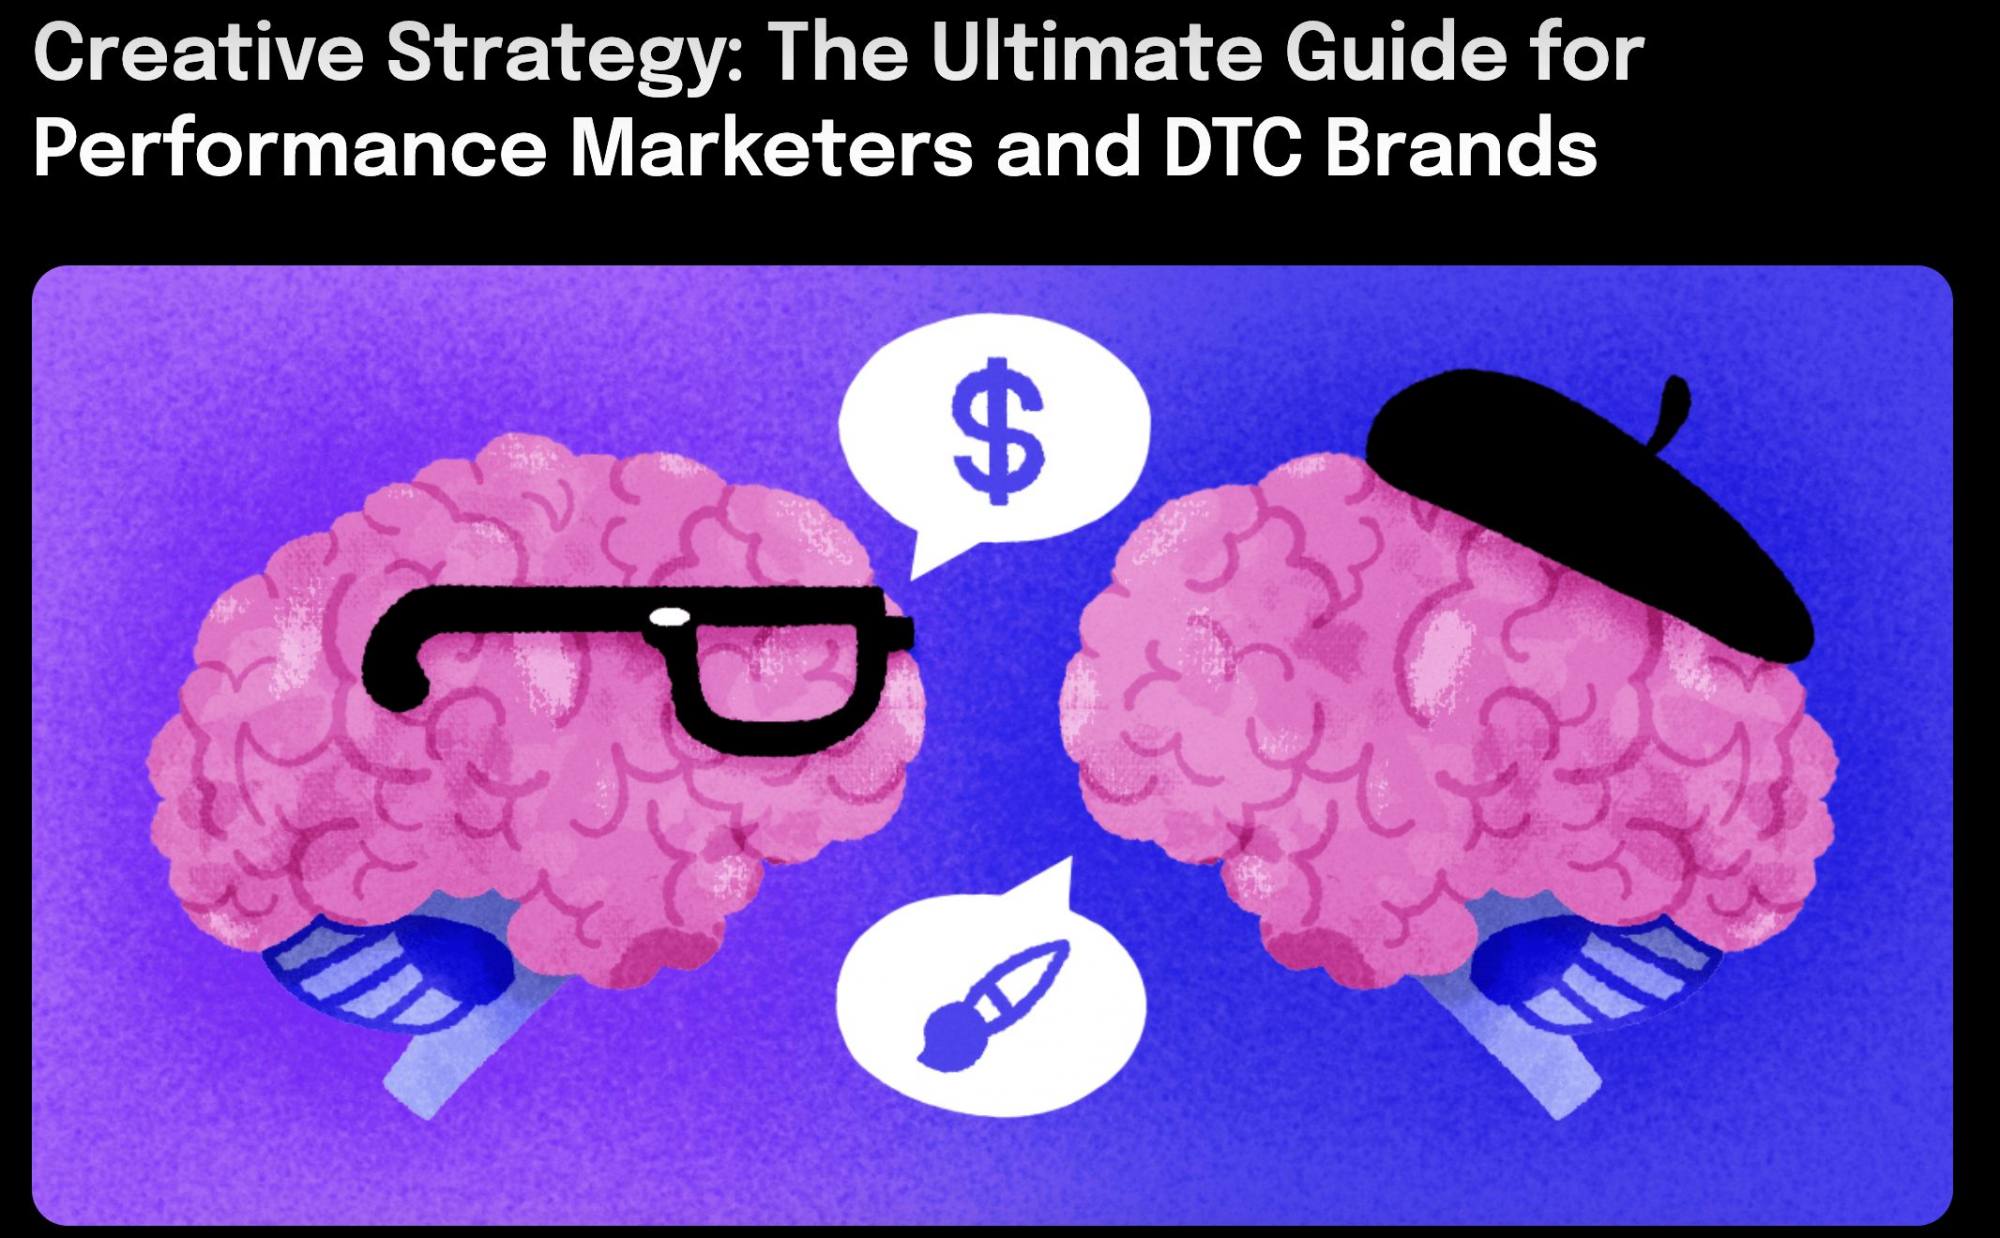 Creative Strategy:The Ultimate Guide For Performance Marketers and DTC Brands